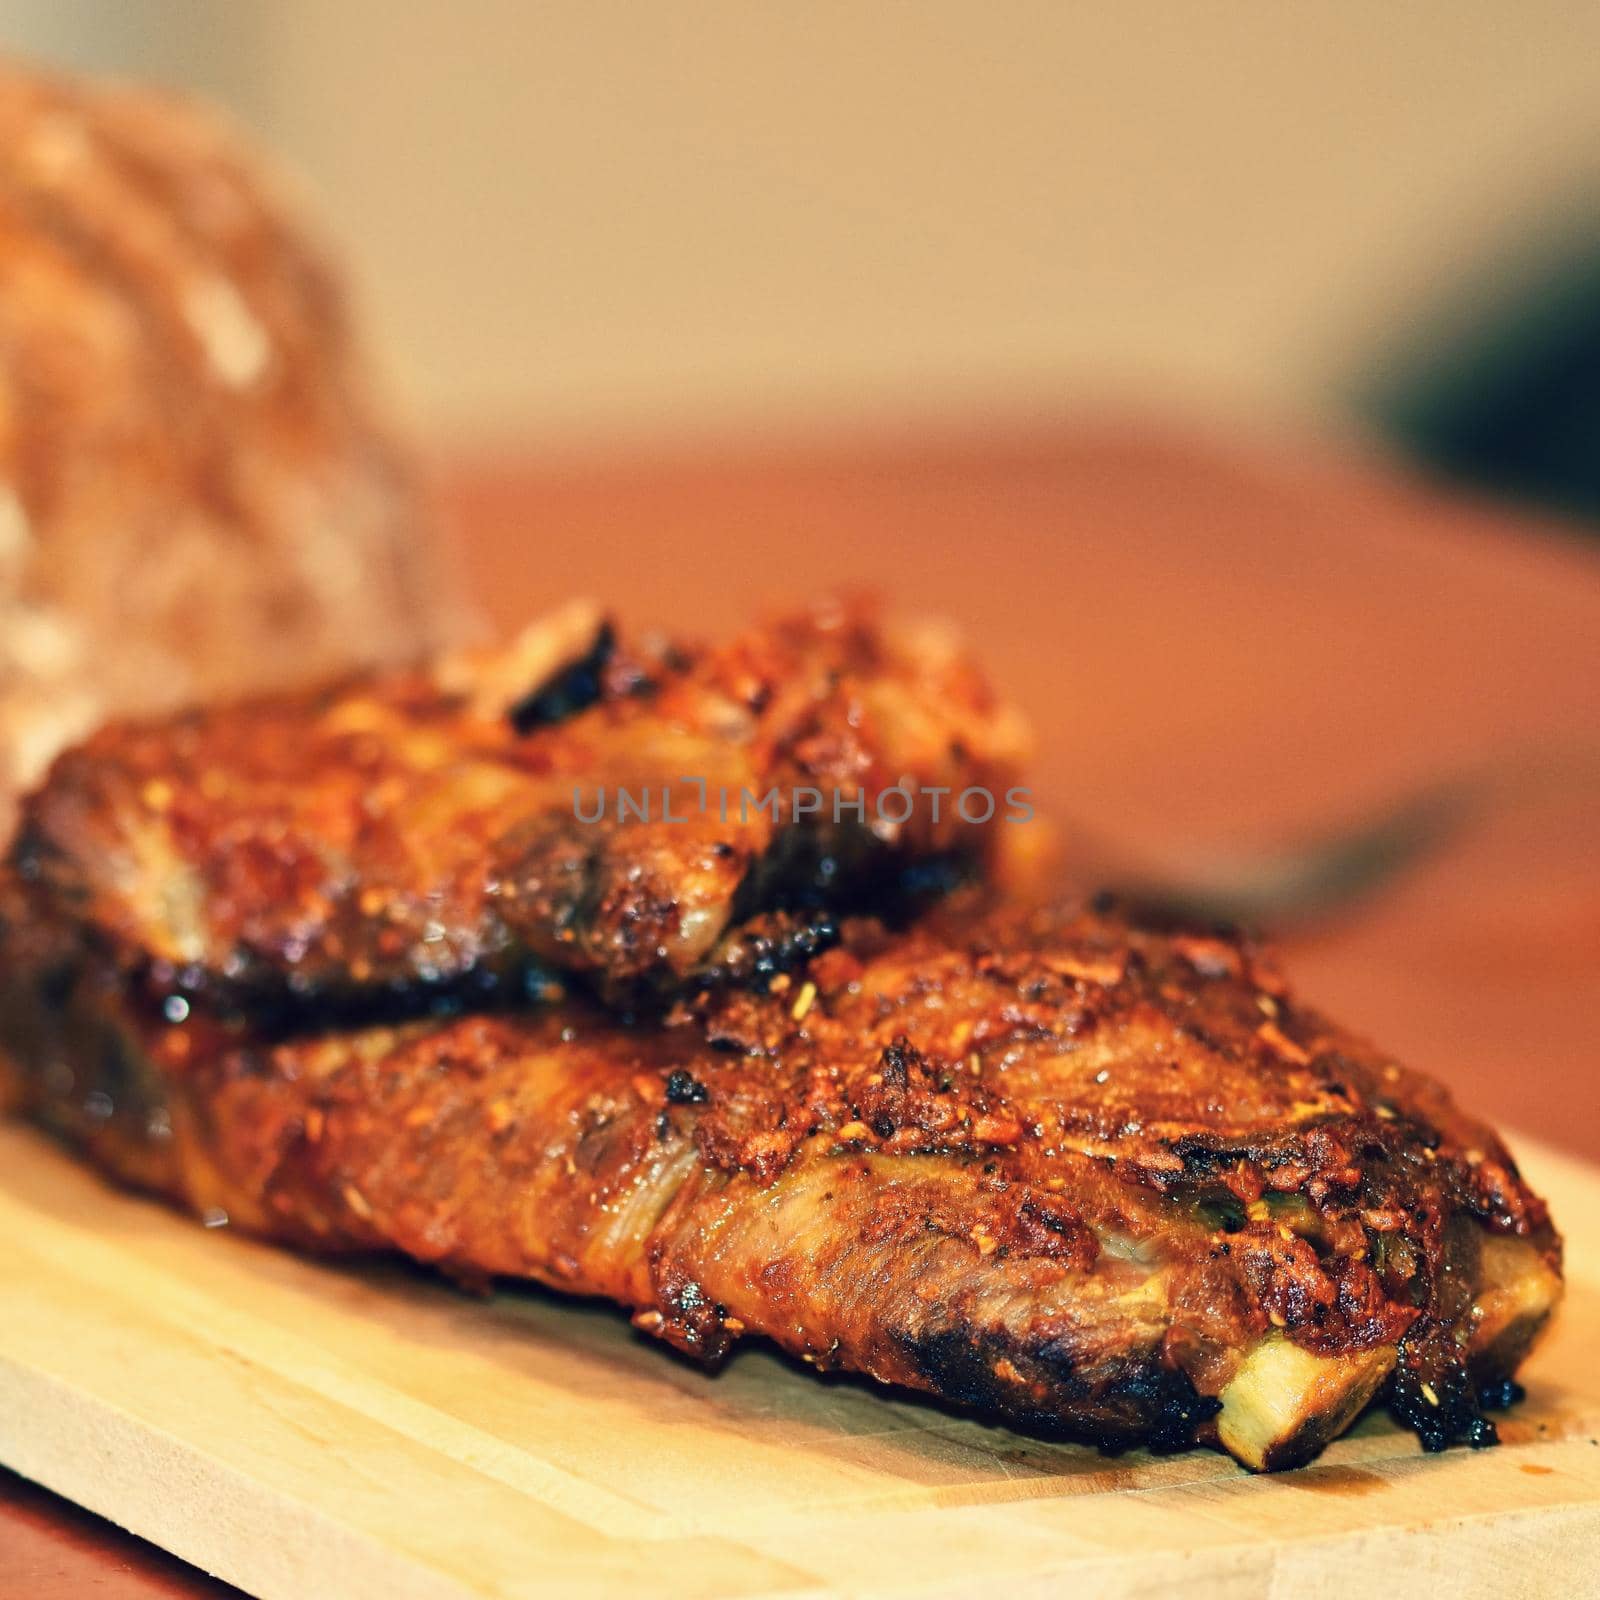 Roasted pork ribs. On wooden background and bread. by Montypeter